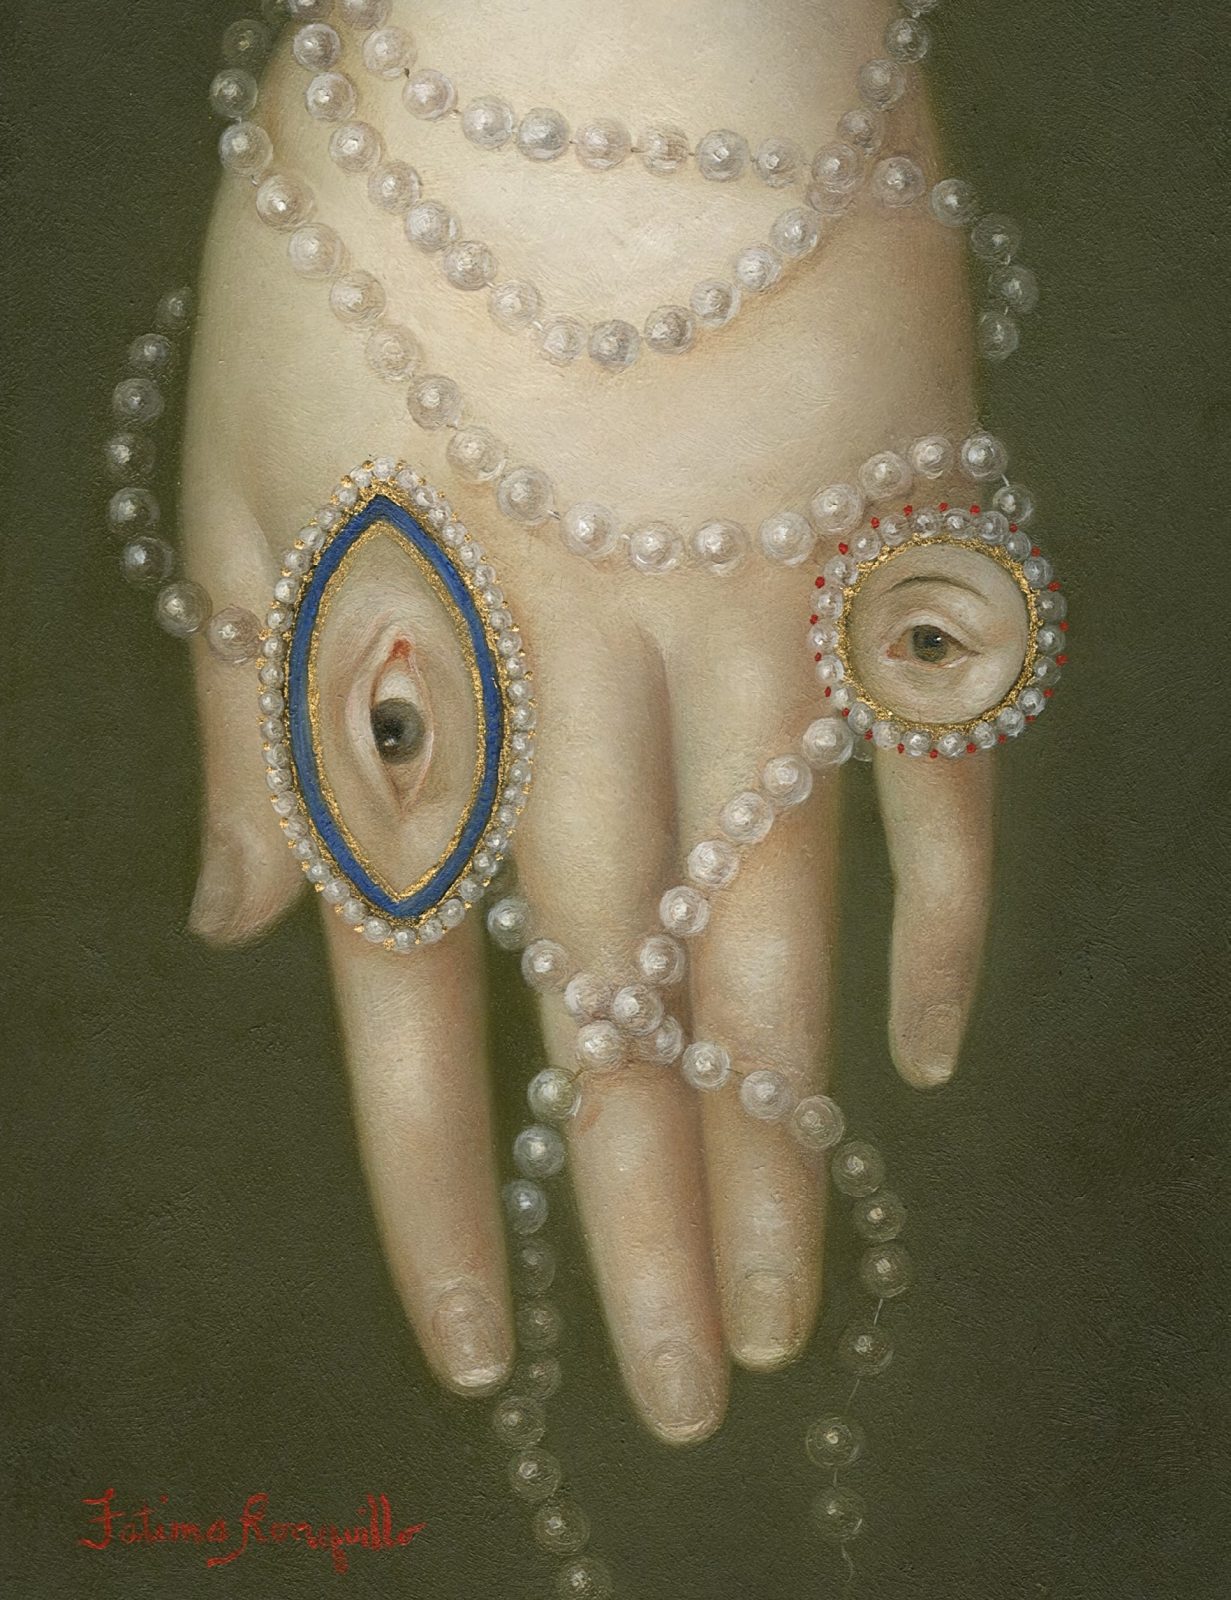 “Hand With Pearls and Lover’s Eyes” 7x5 inches, oil on panel © Fatima Ronquillo, 2017